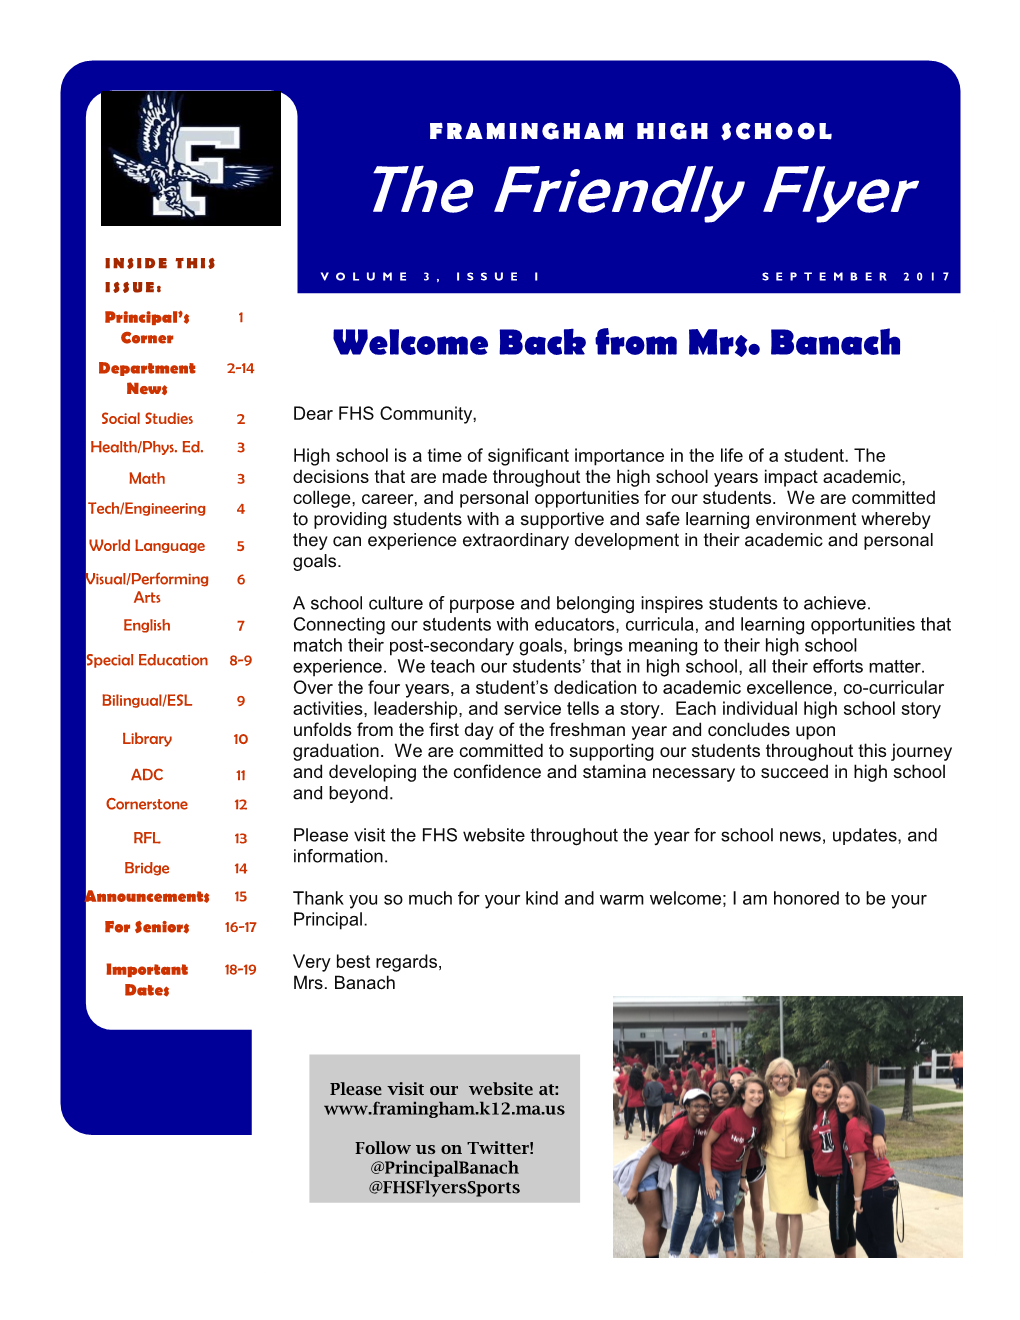 The Friendly Flyer